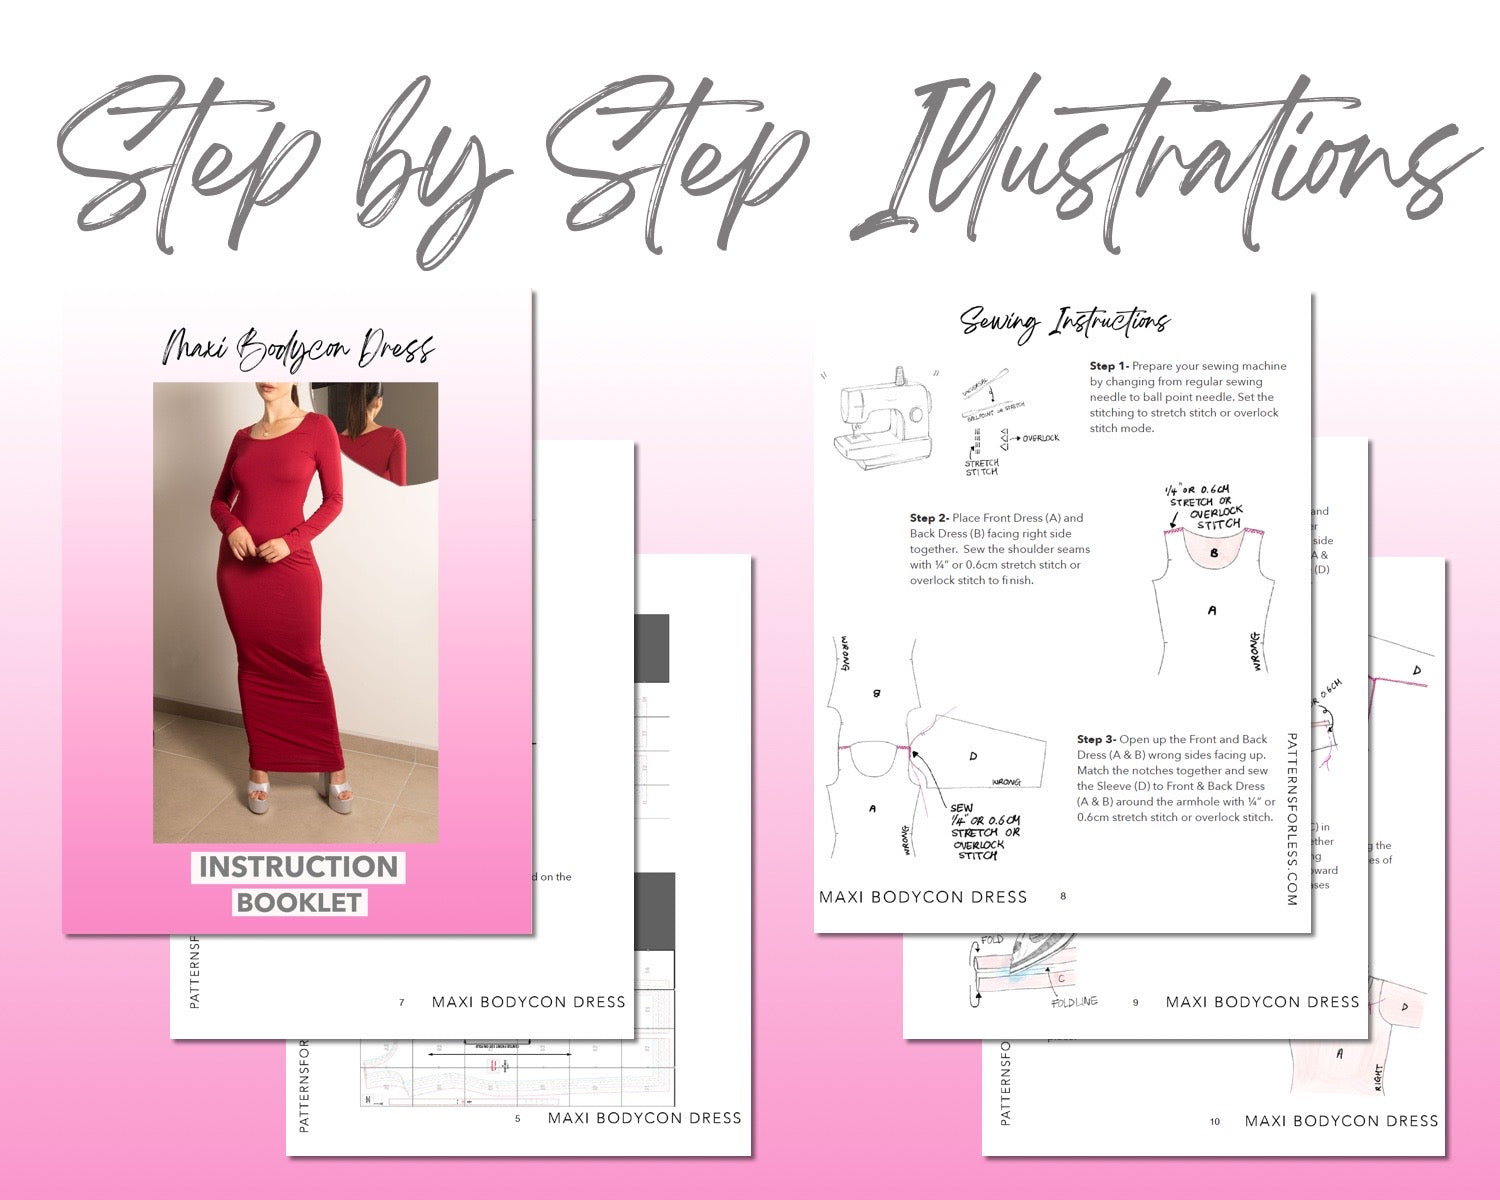 Maxi Bodycon Dress sewing pattern step by step illustrations.